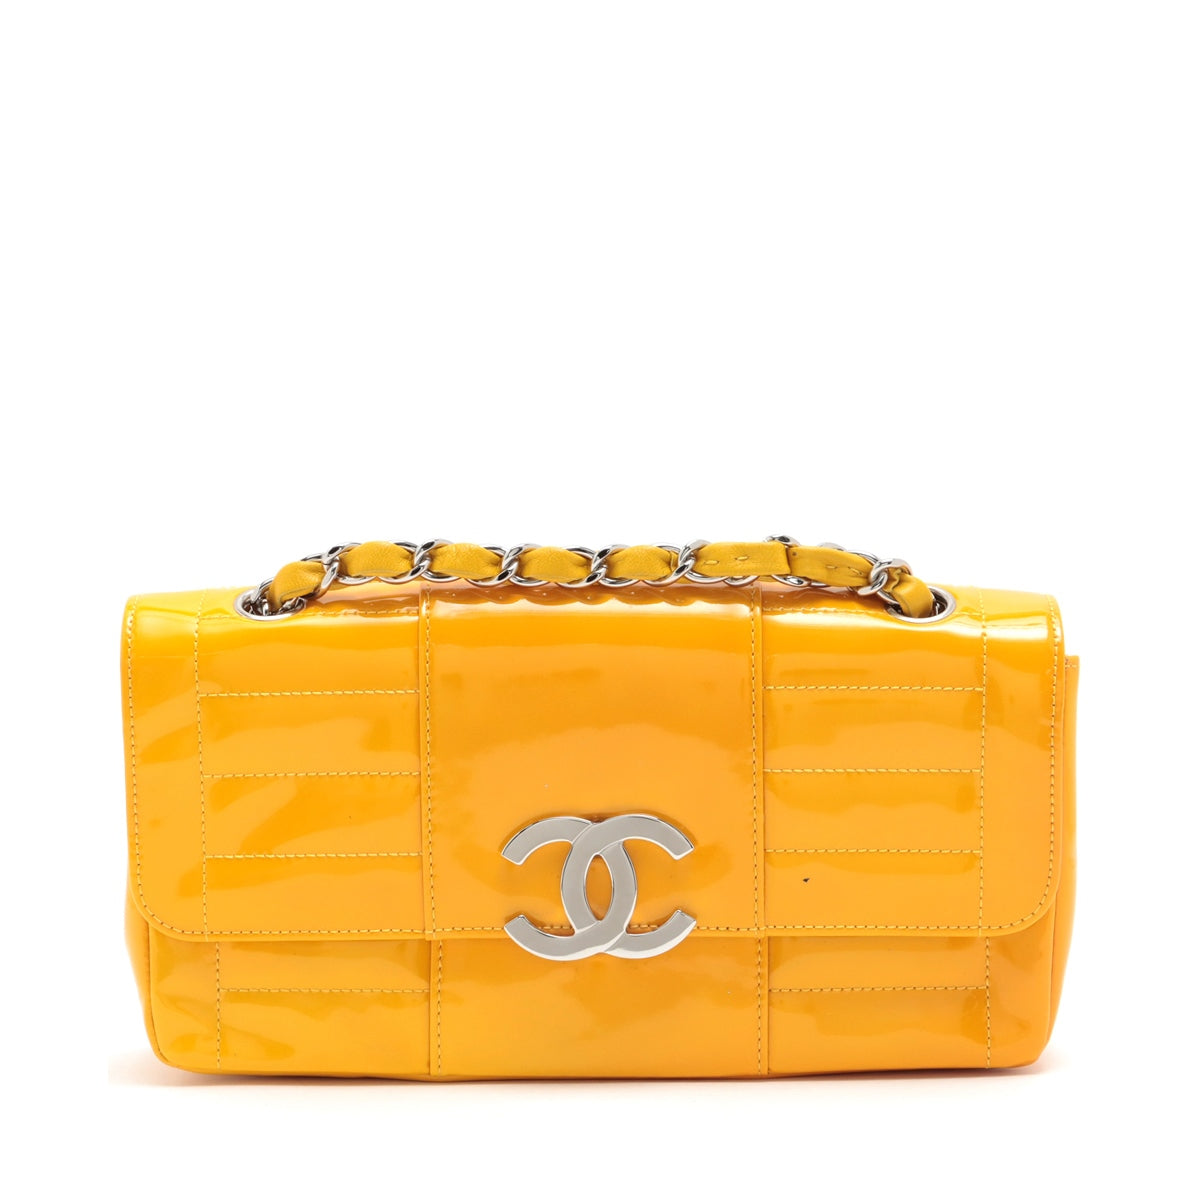 Chanel Coco Mark Patent leather Single flap Double chain bag Yellow Silver Metal fittings 10XXXXXX